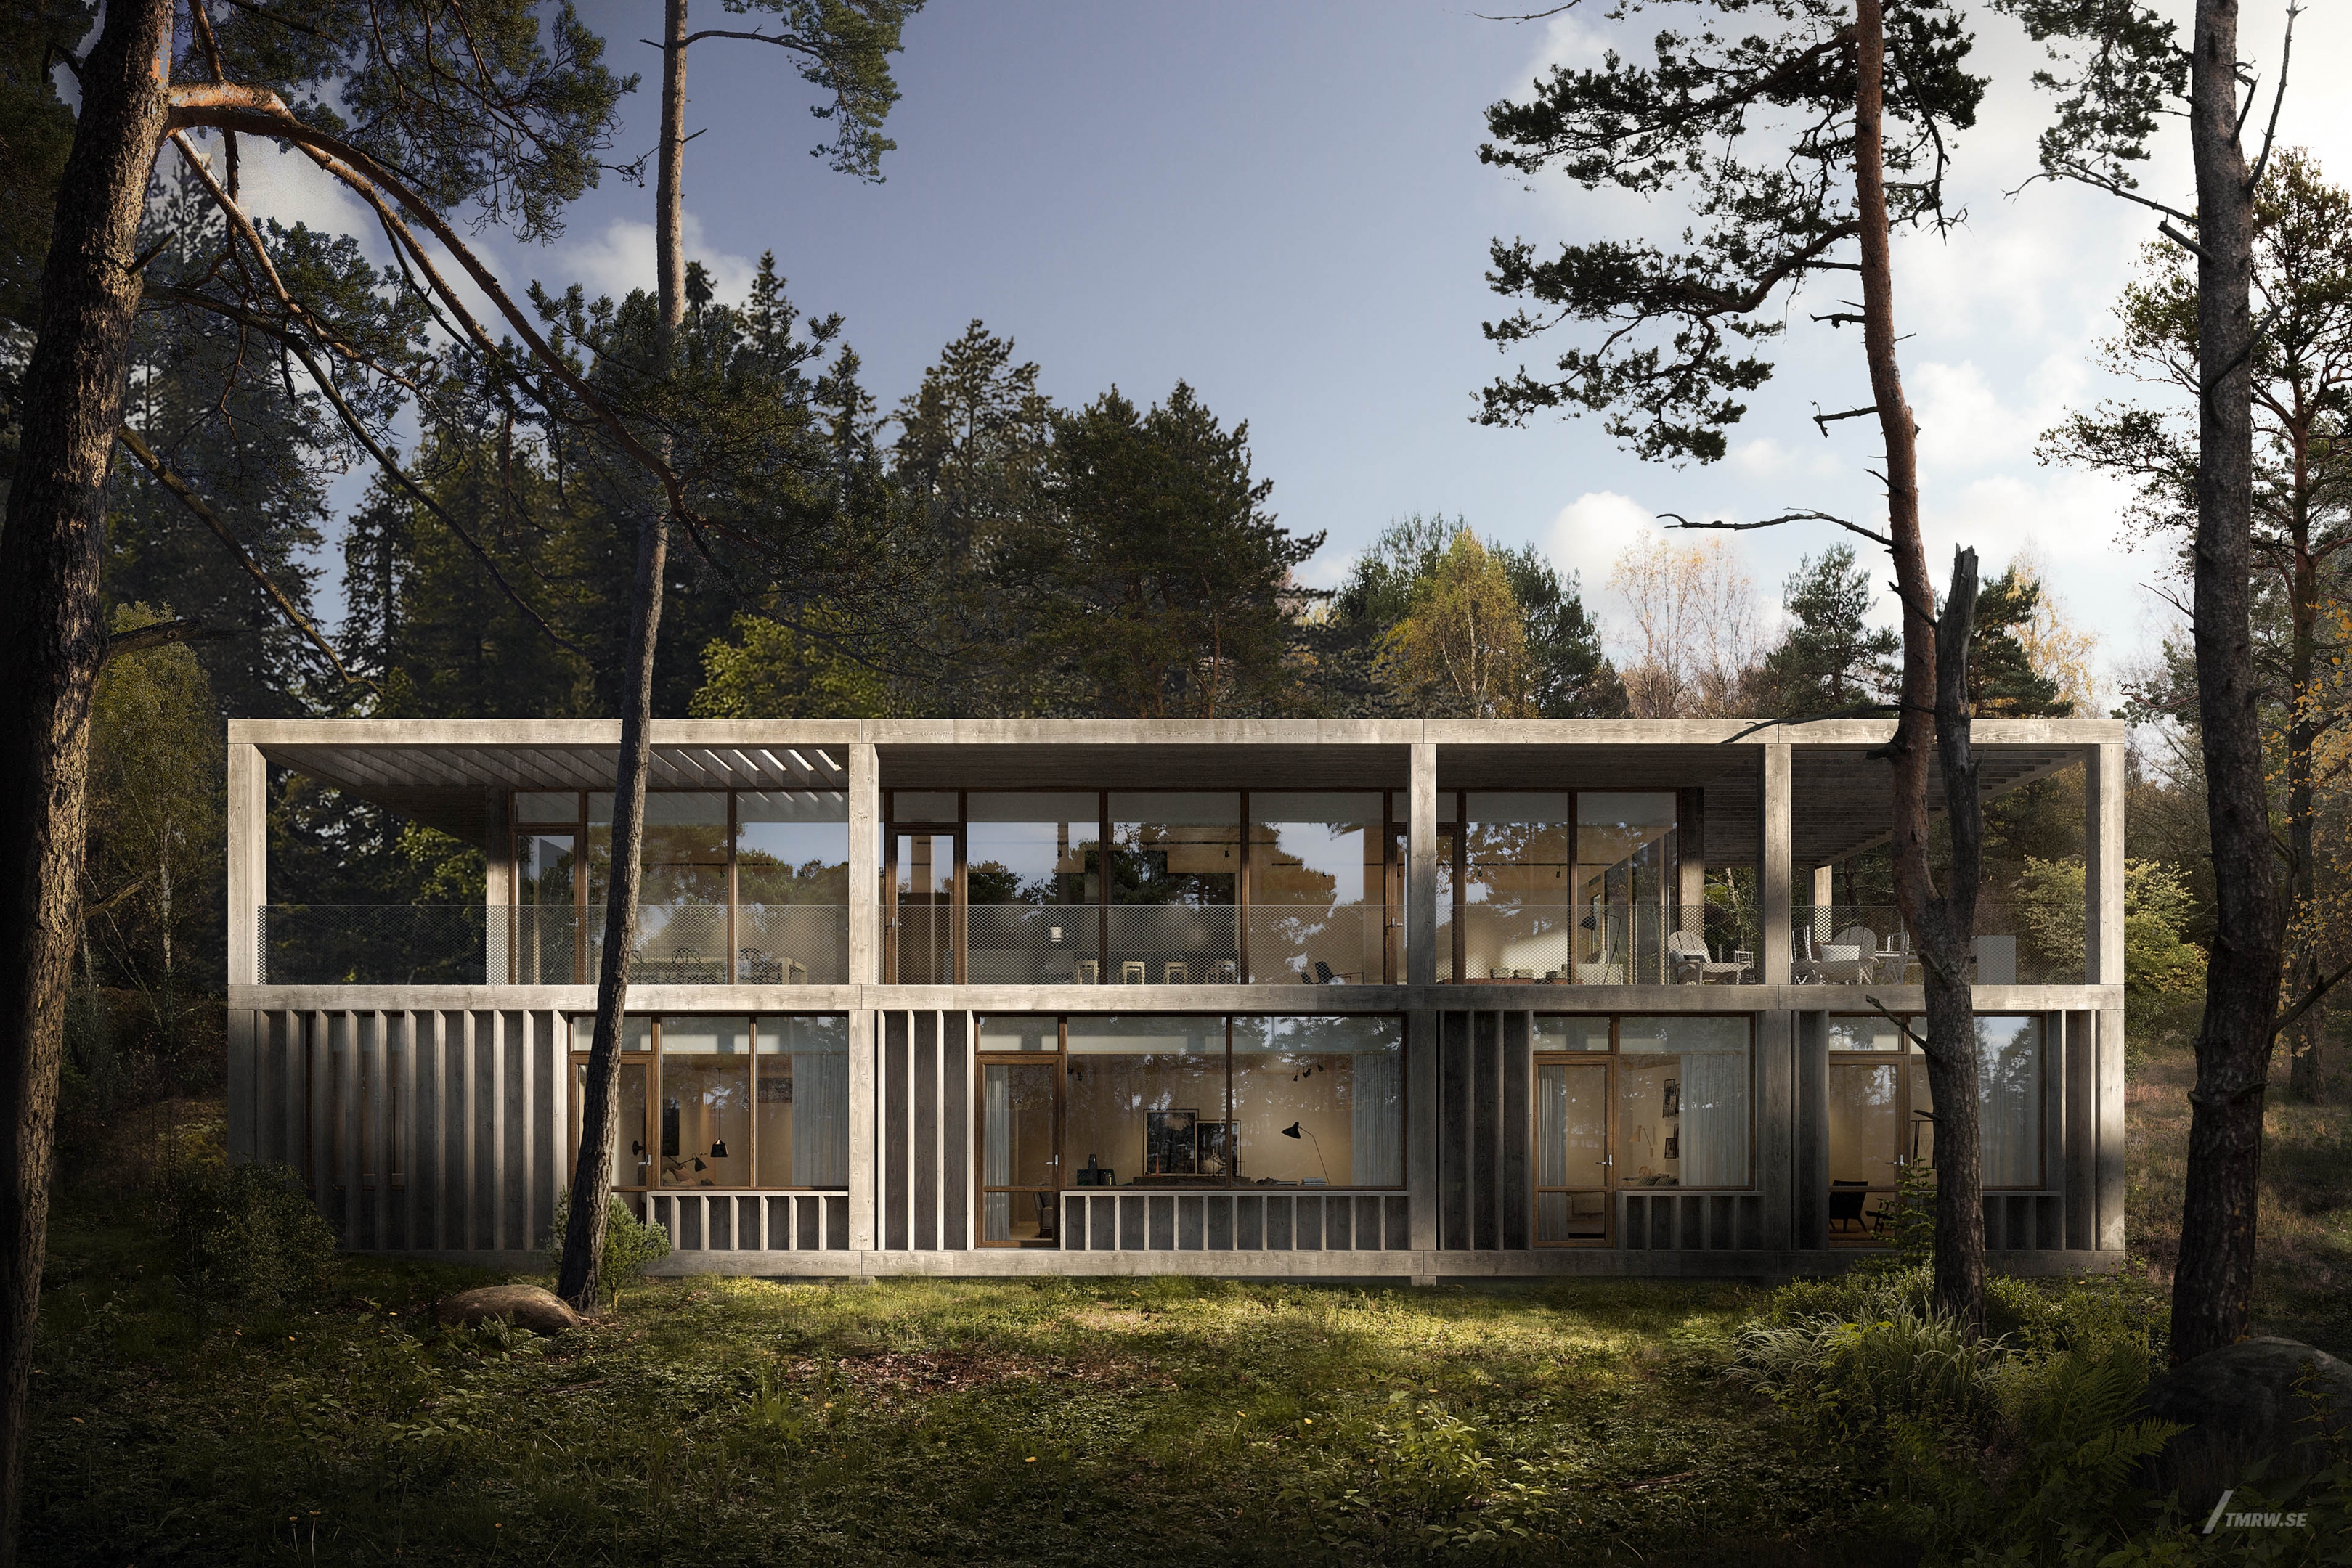 Architectural visualization of Traryd for Skarp a house in the forest in day light from an eye view.